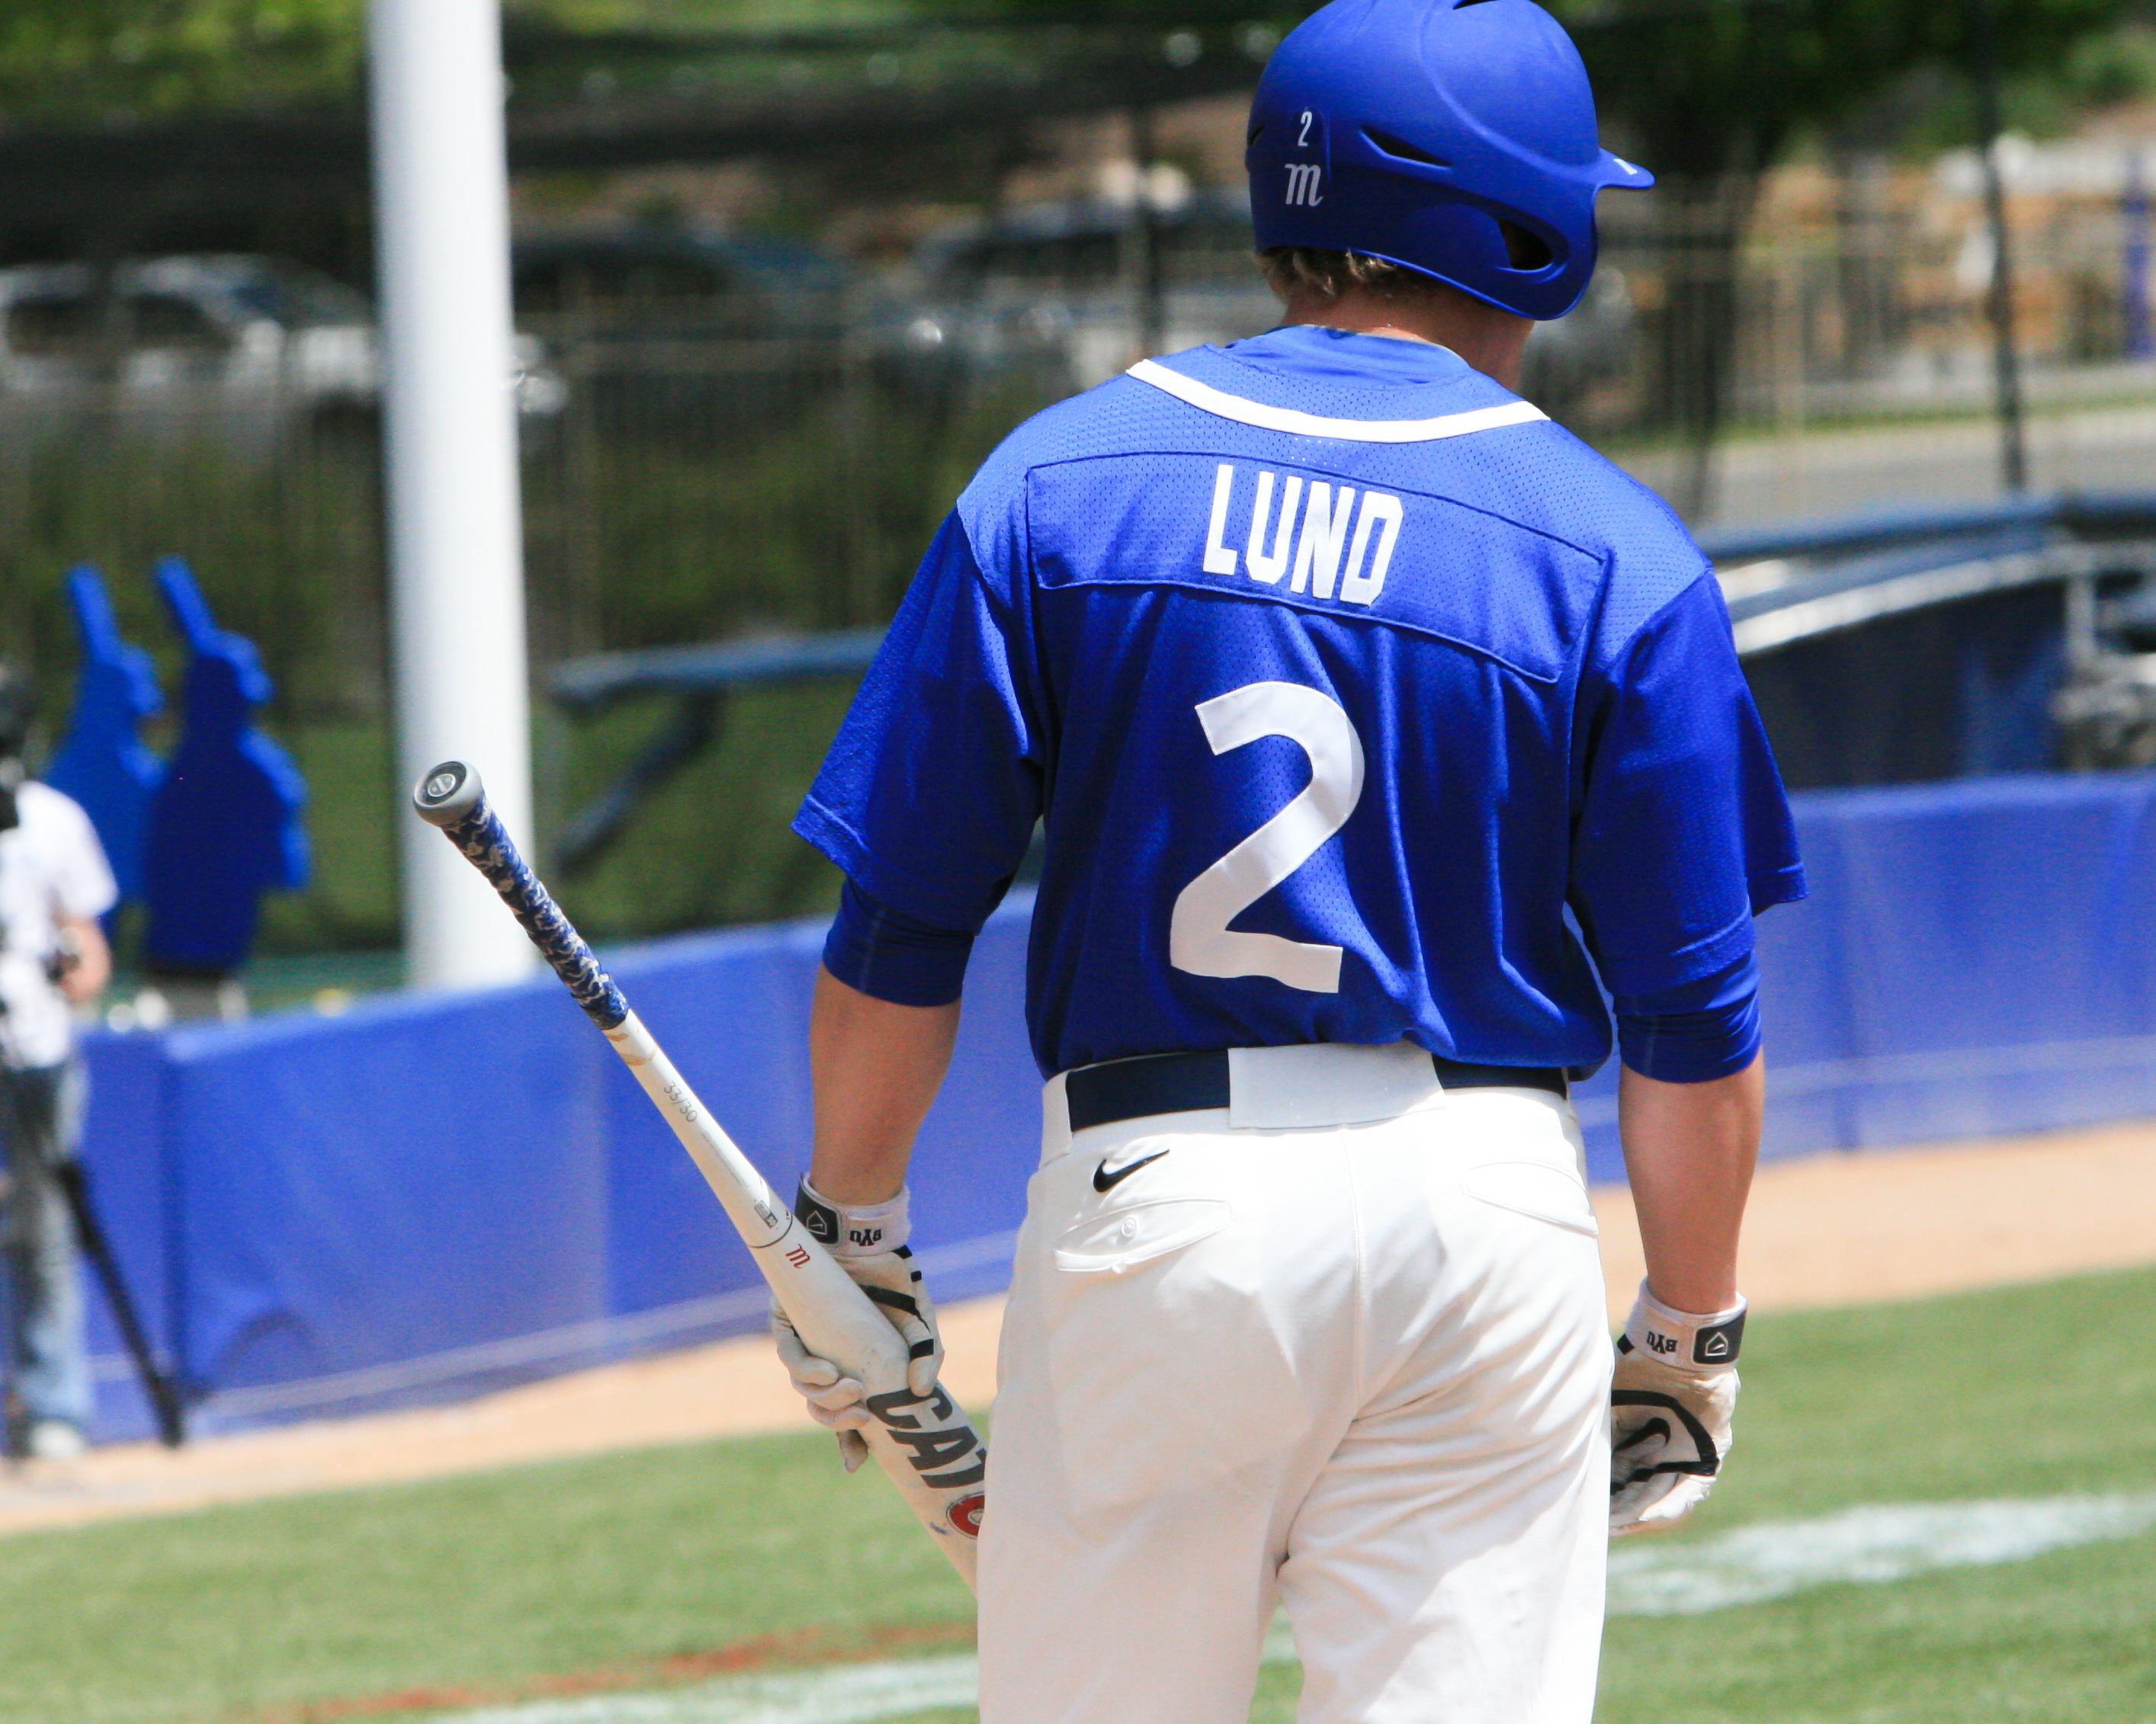 BYU outfielder Brennon Lund steps out of the batter's box in a game against Gonzaga. Photo by Natalie Stoker